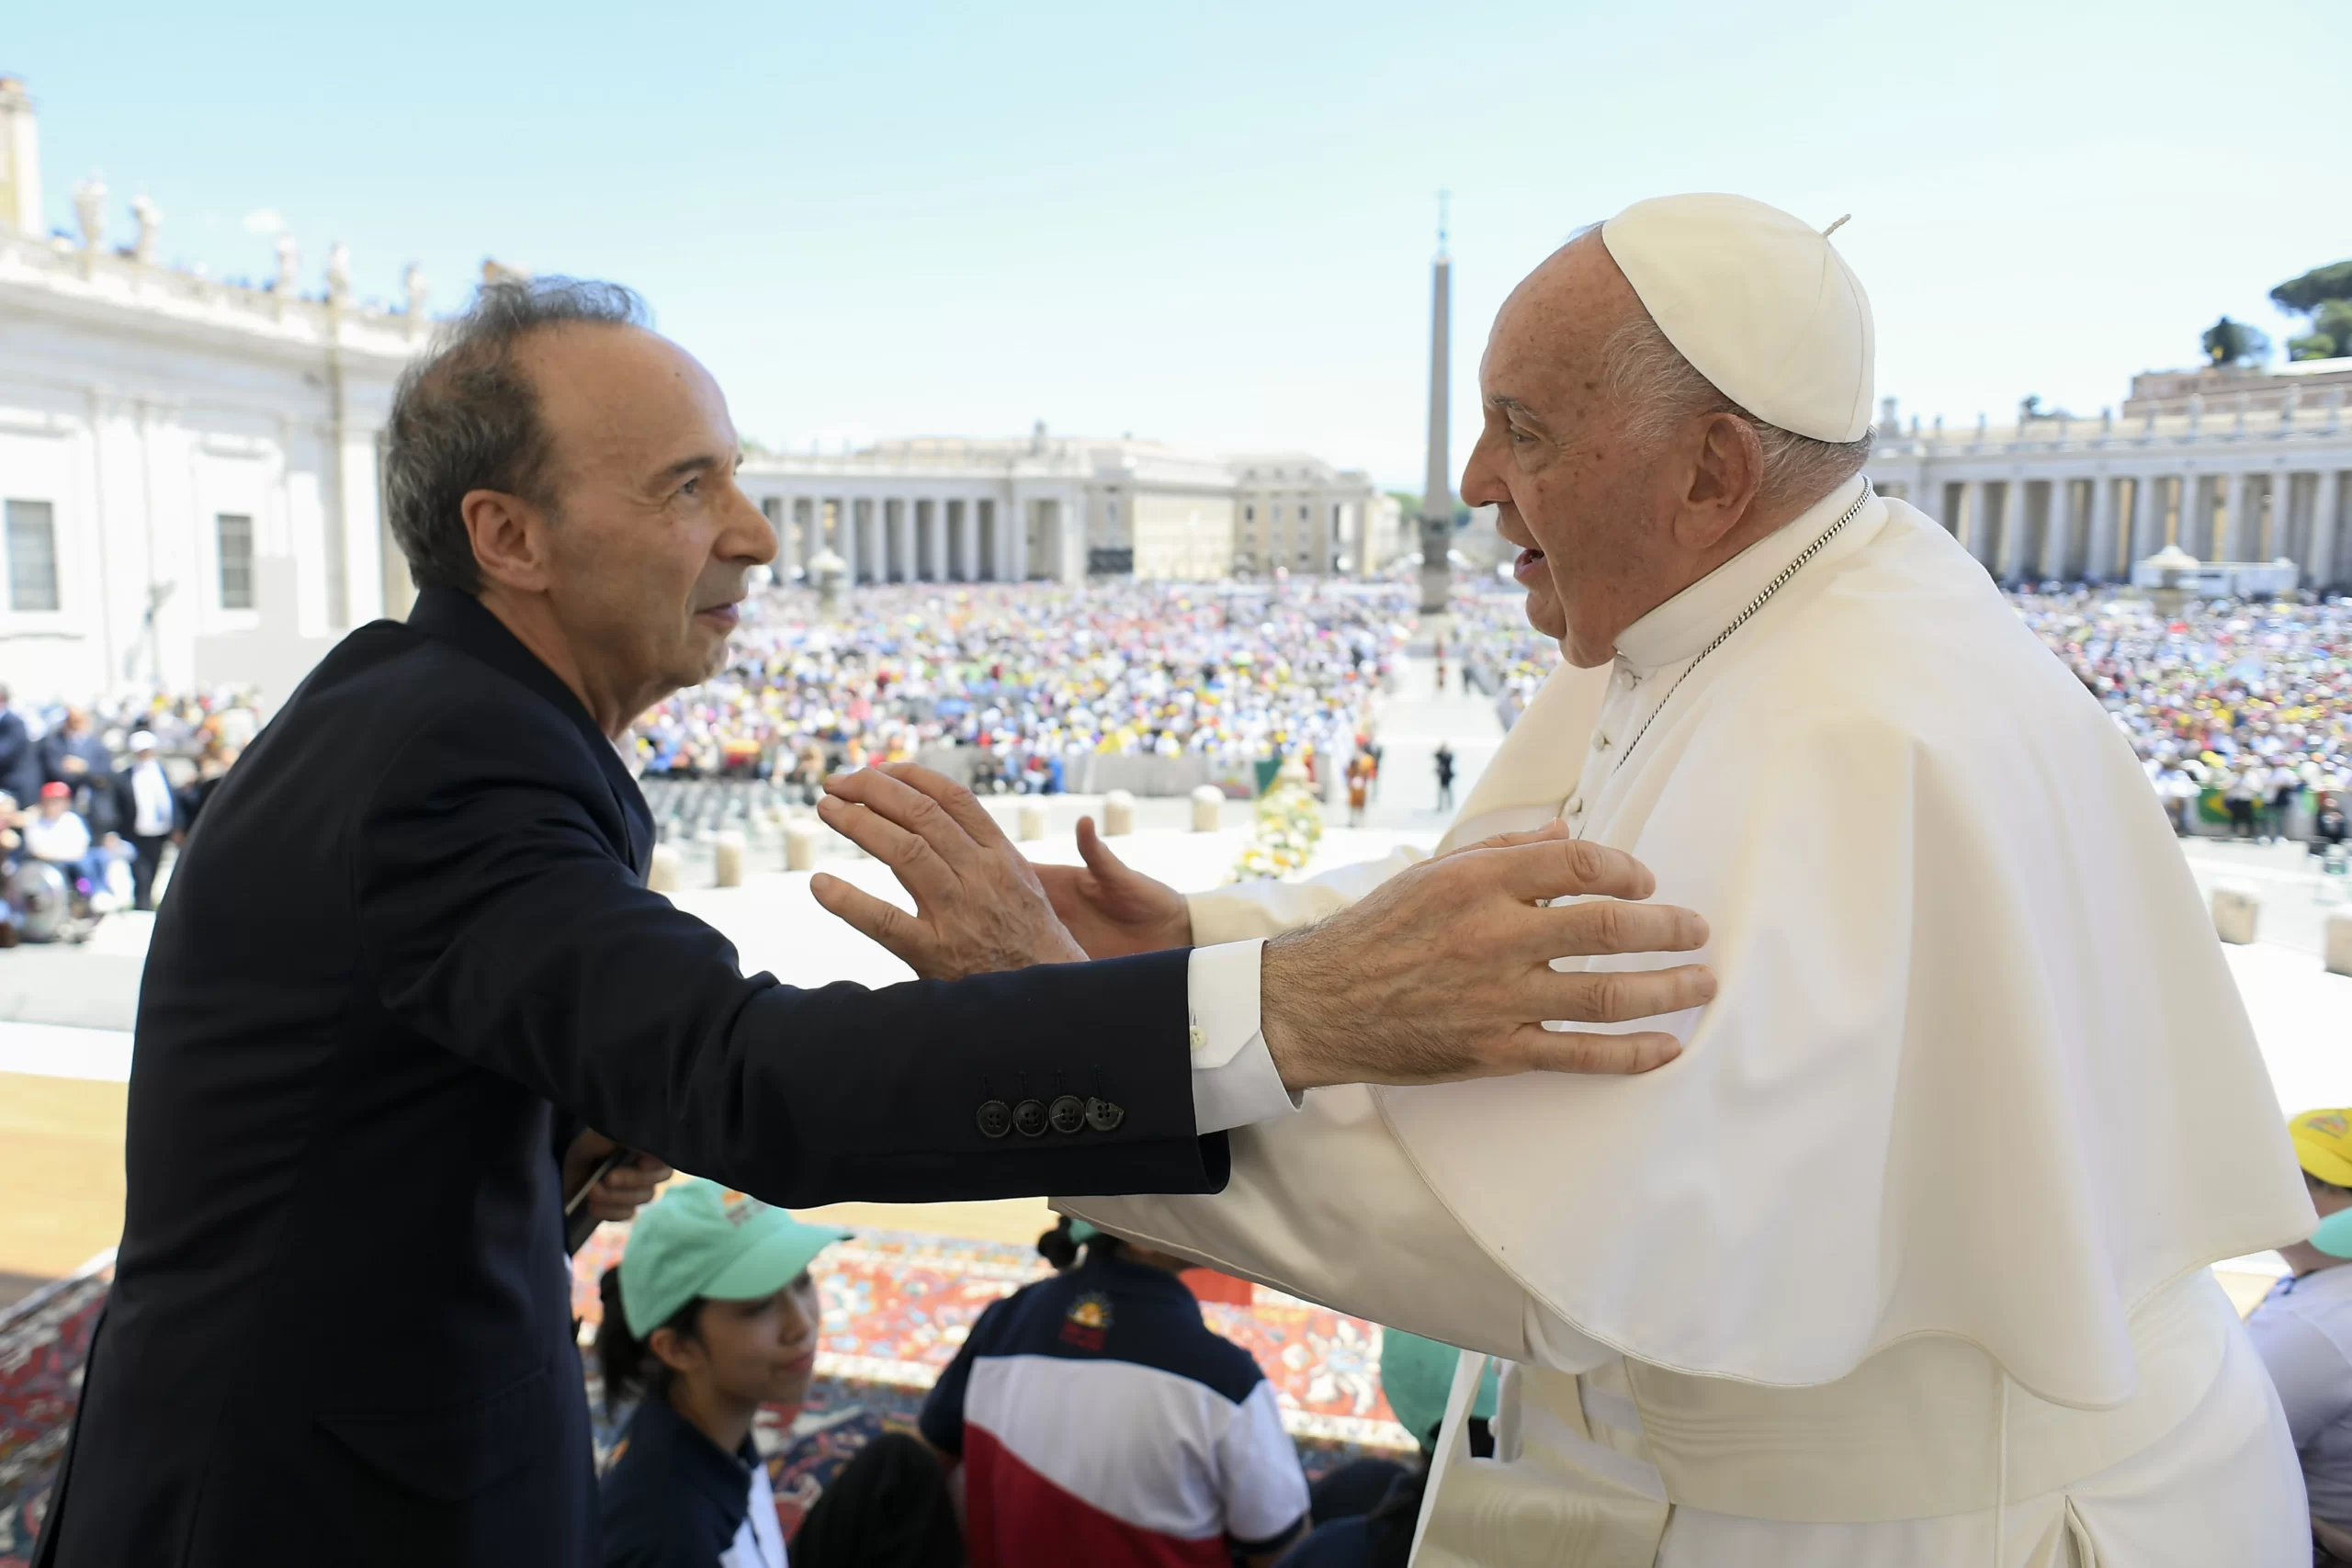 The pope greets Italian actor Roberto Benigni after the closing procession for World Children's Day in St. Peter's Square at the Vatican on Sunday, May 26, 2024. The actor took the stage for a lively and inspirational monologue that combined good humor with a call for children to read and to dream. Credit: Daniel Ibañez/CNA